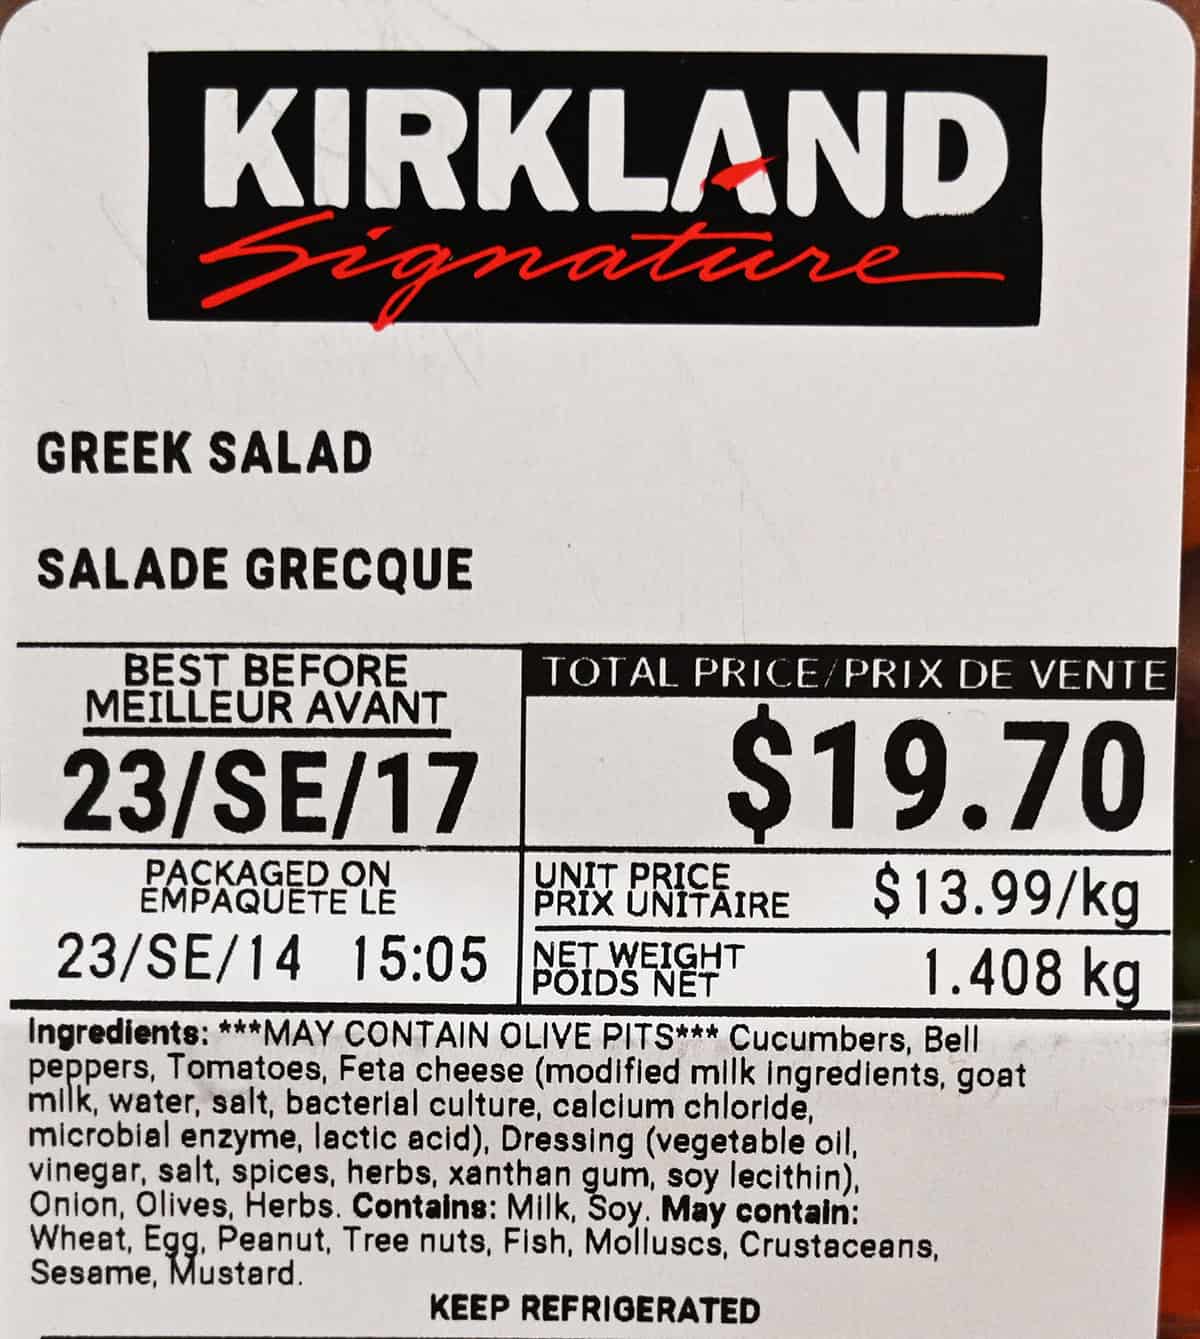 Closeup image of the front label of the salad showing best before date, ingredients and cost.